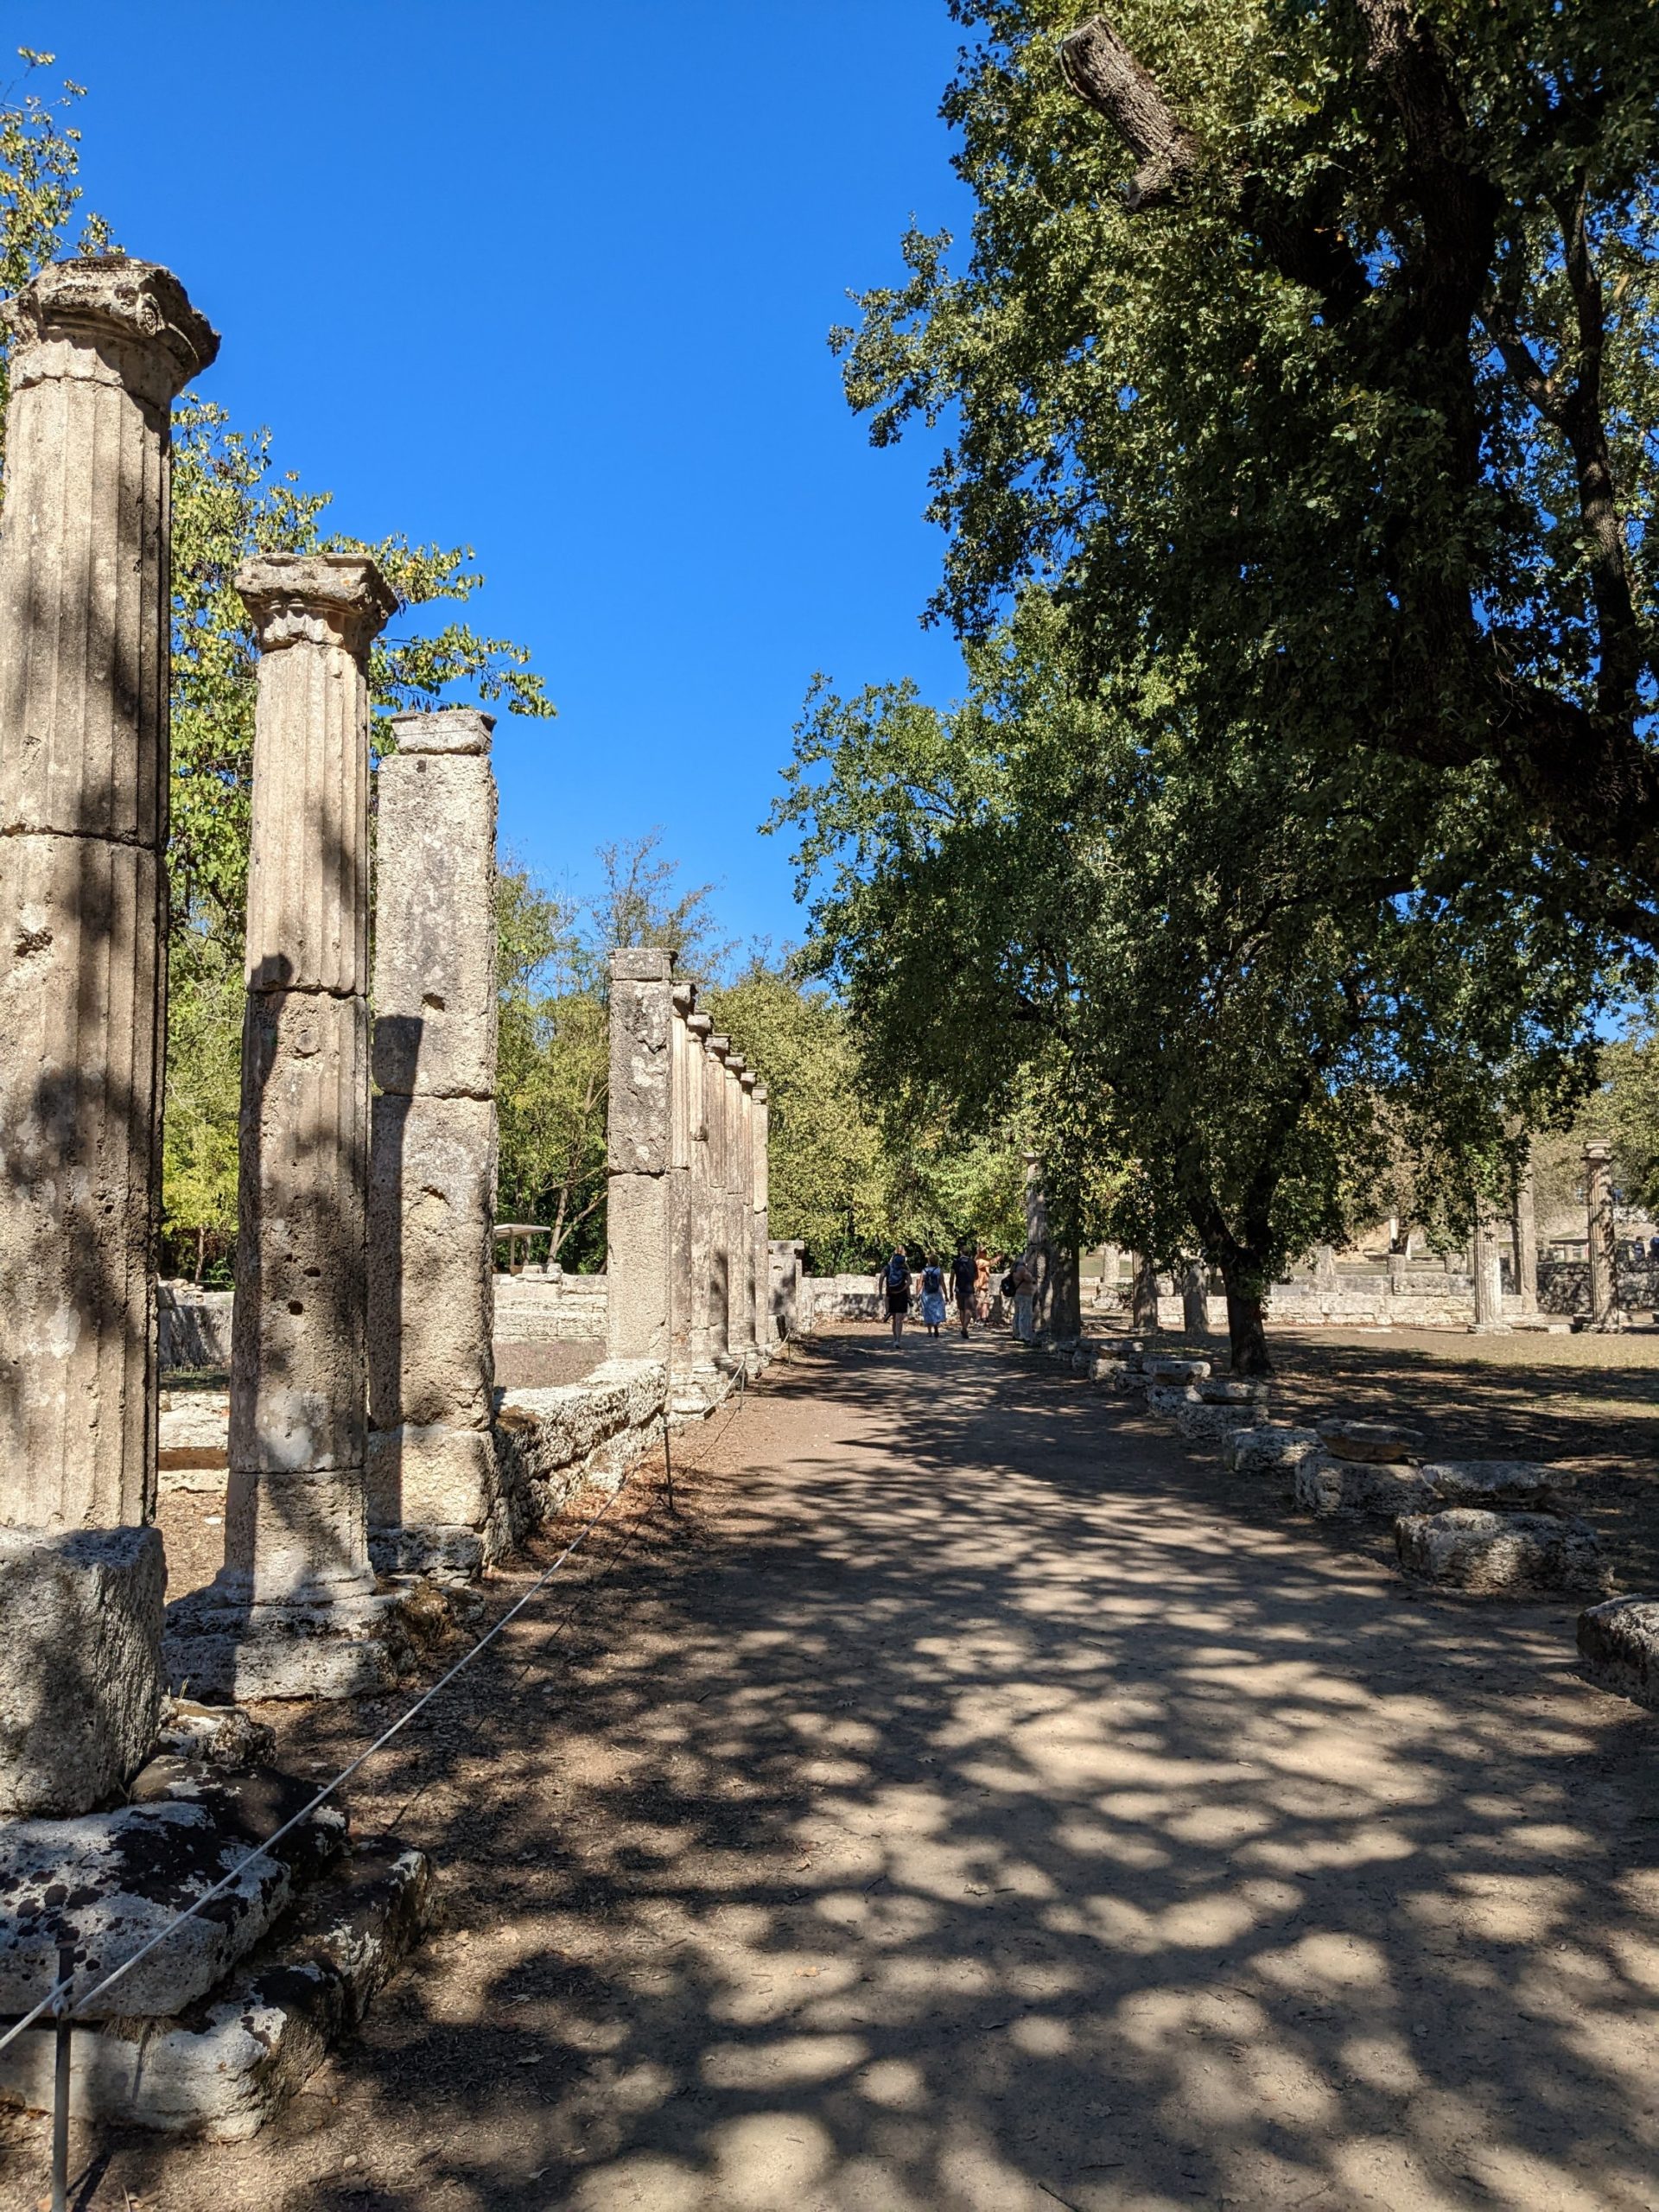 a stone pillars lined up on a dirt path